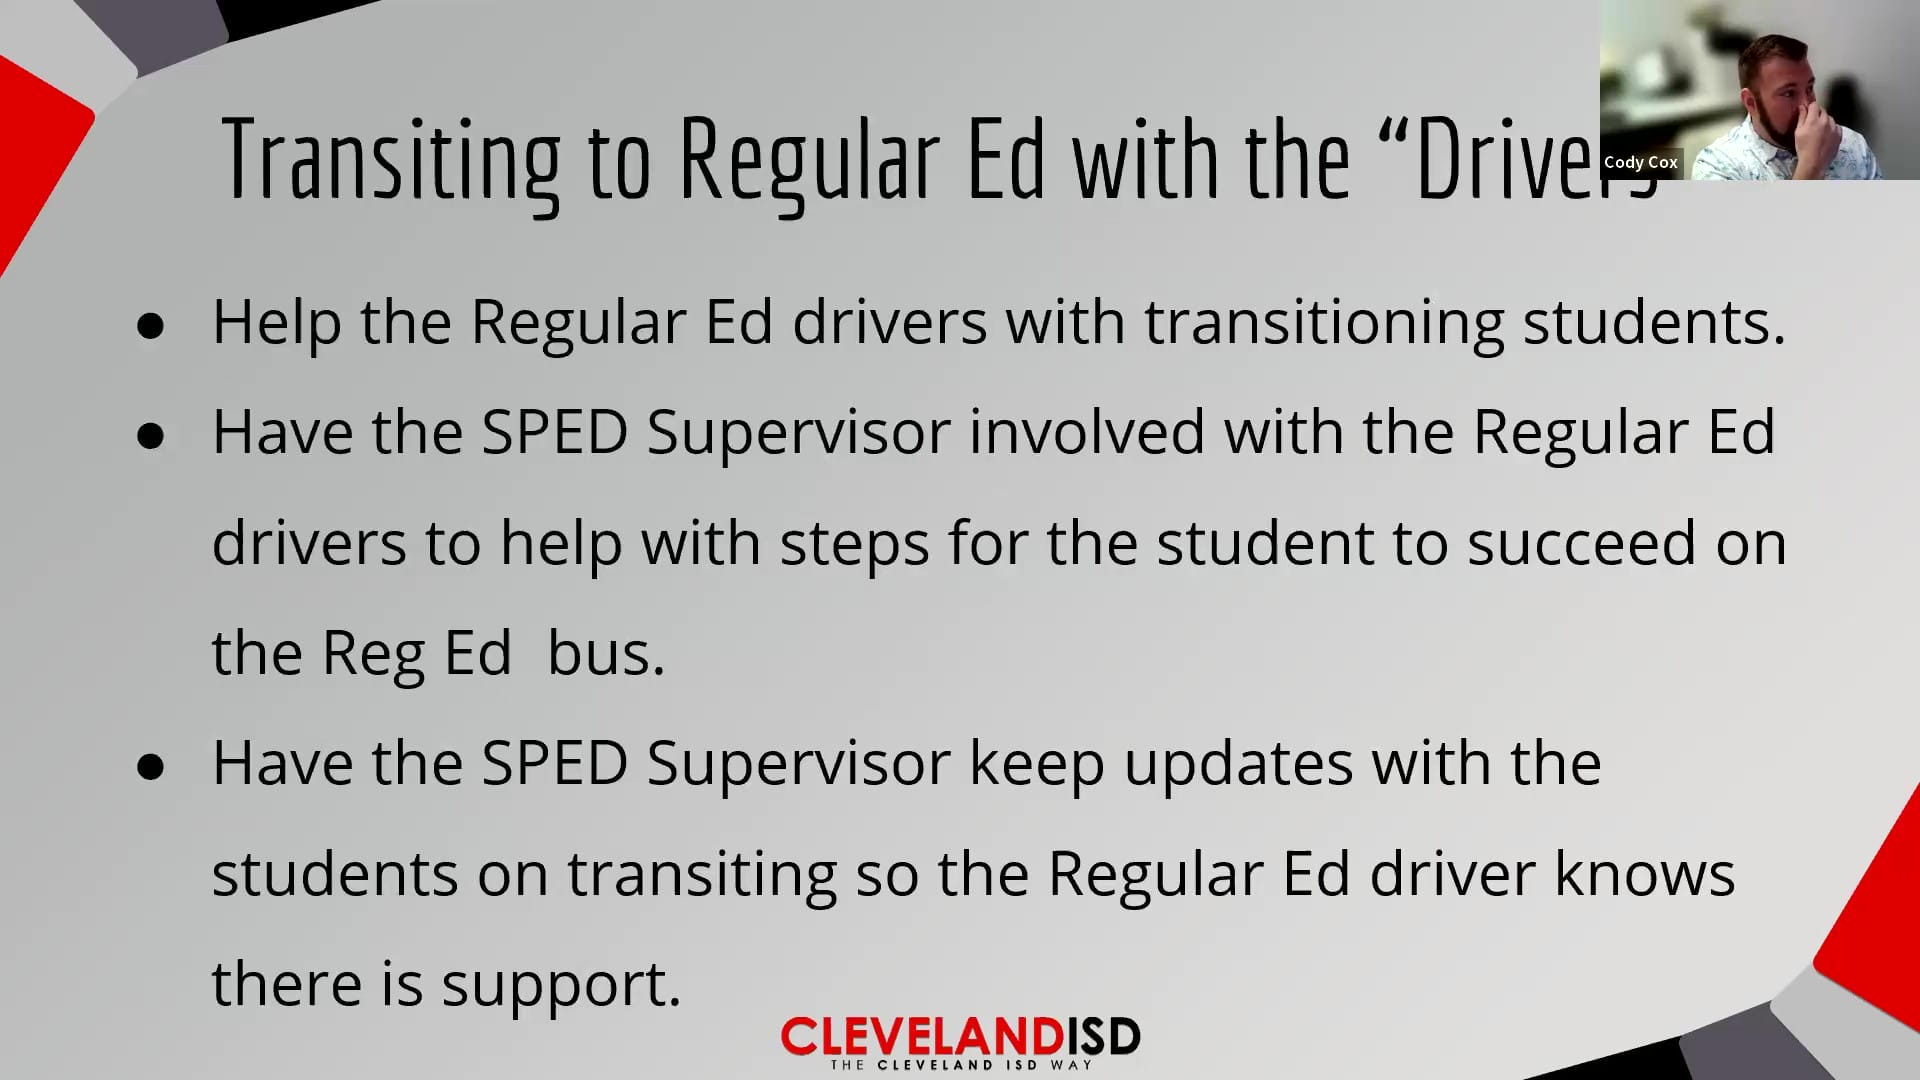 Transporting Students with Disabilities Possibilities Transiting to Regular Ed with Driver